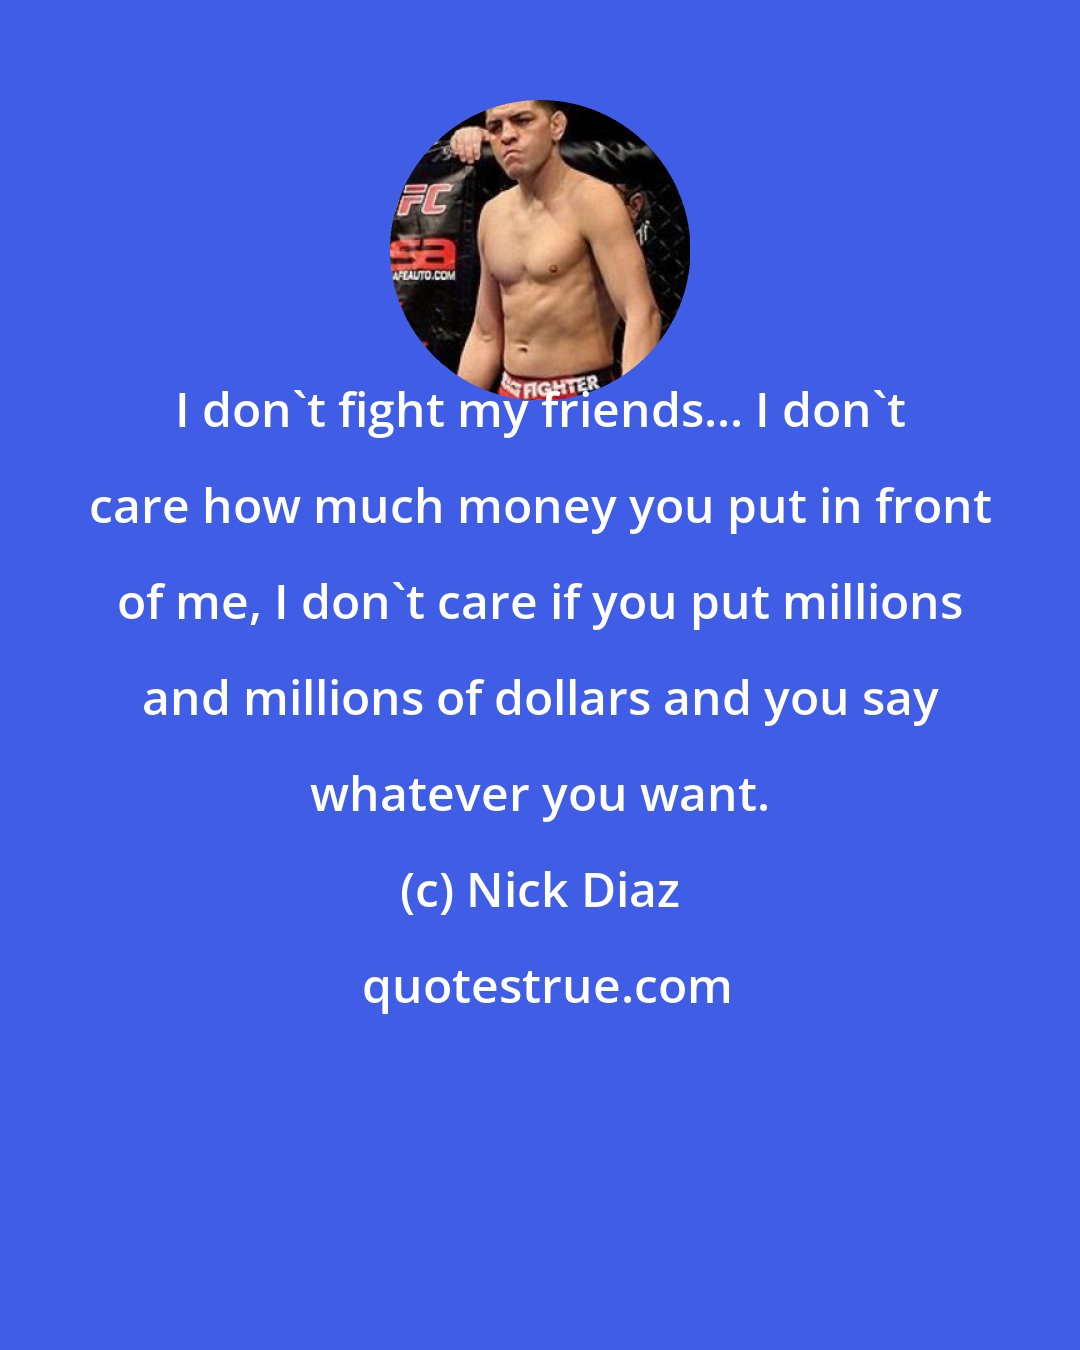 Nick Diaz: I don't fight my friends... I don't care how much money you put in front of me, I don't care if you put millions and millions of dollars and you say whatever you want.